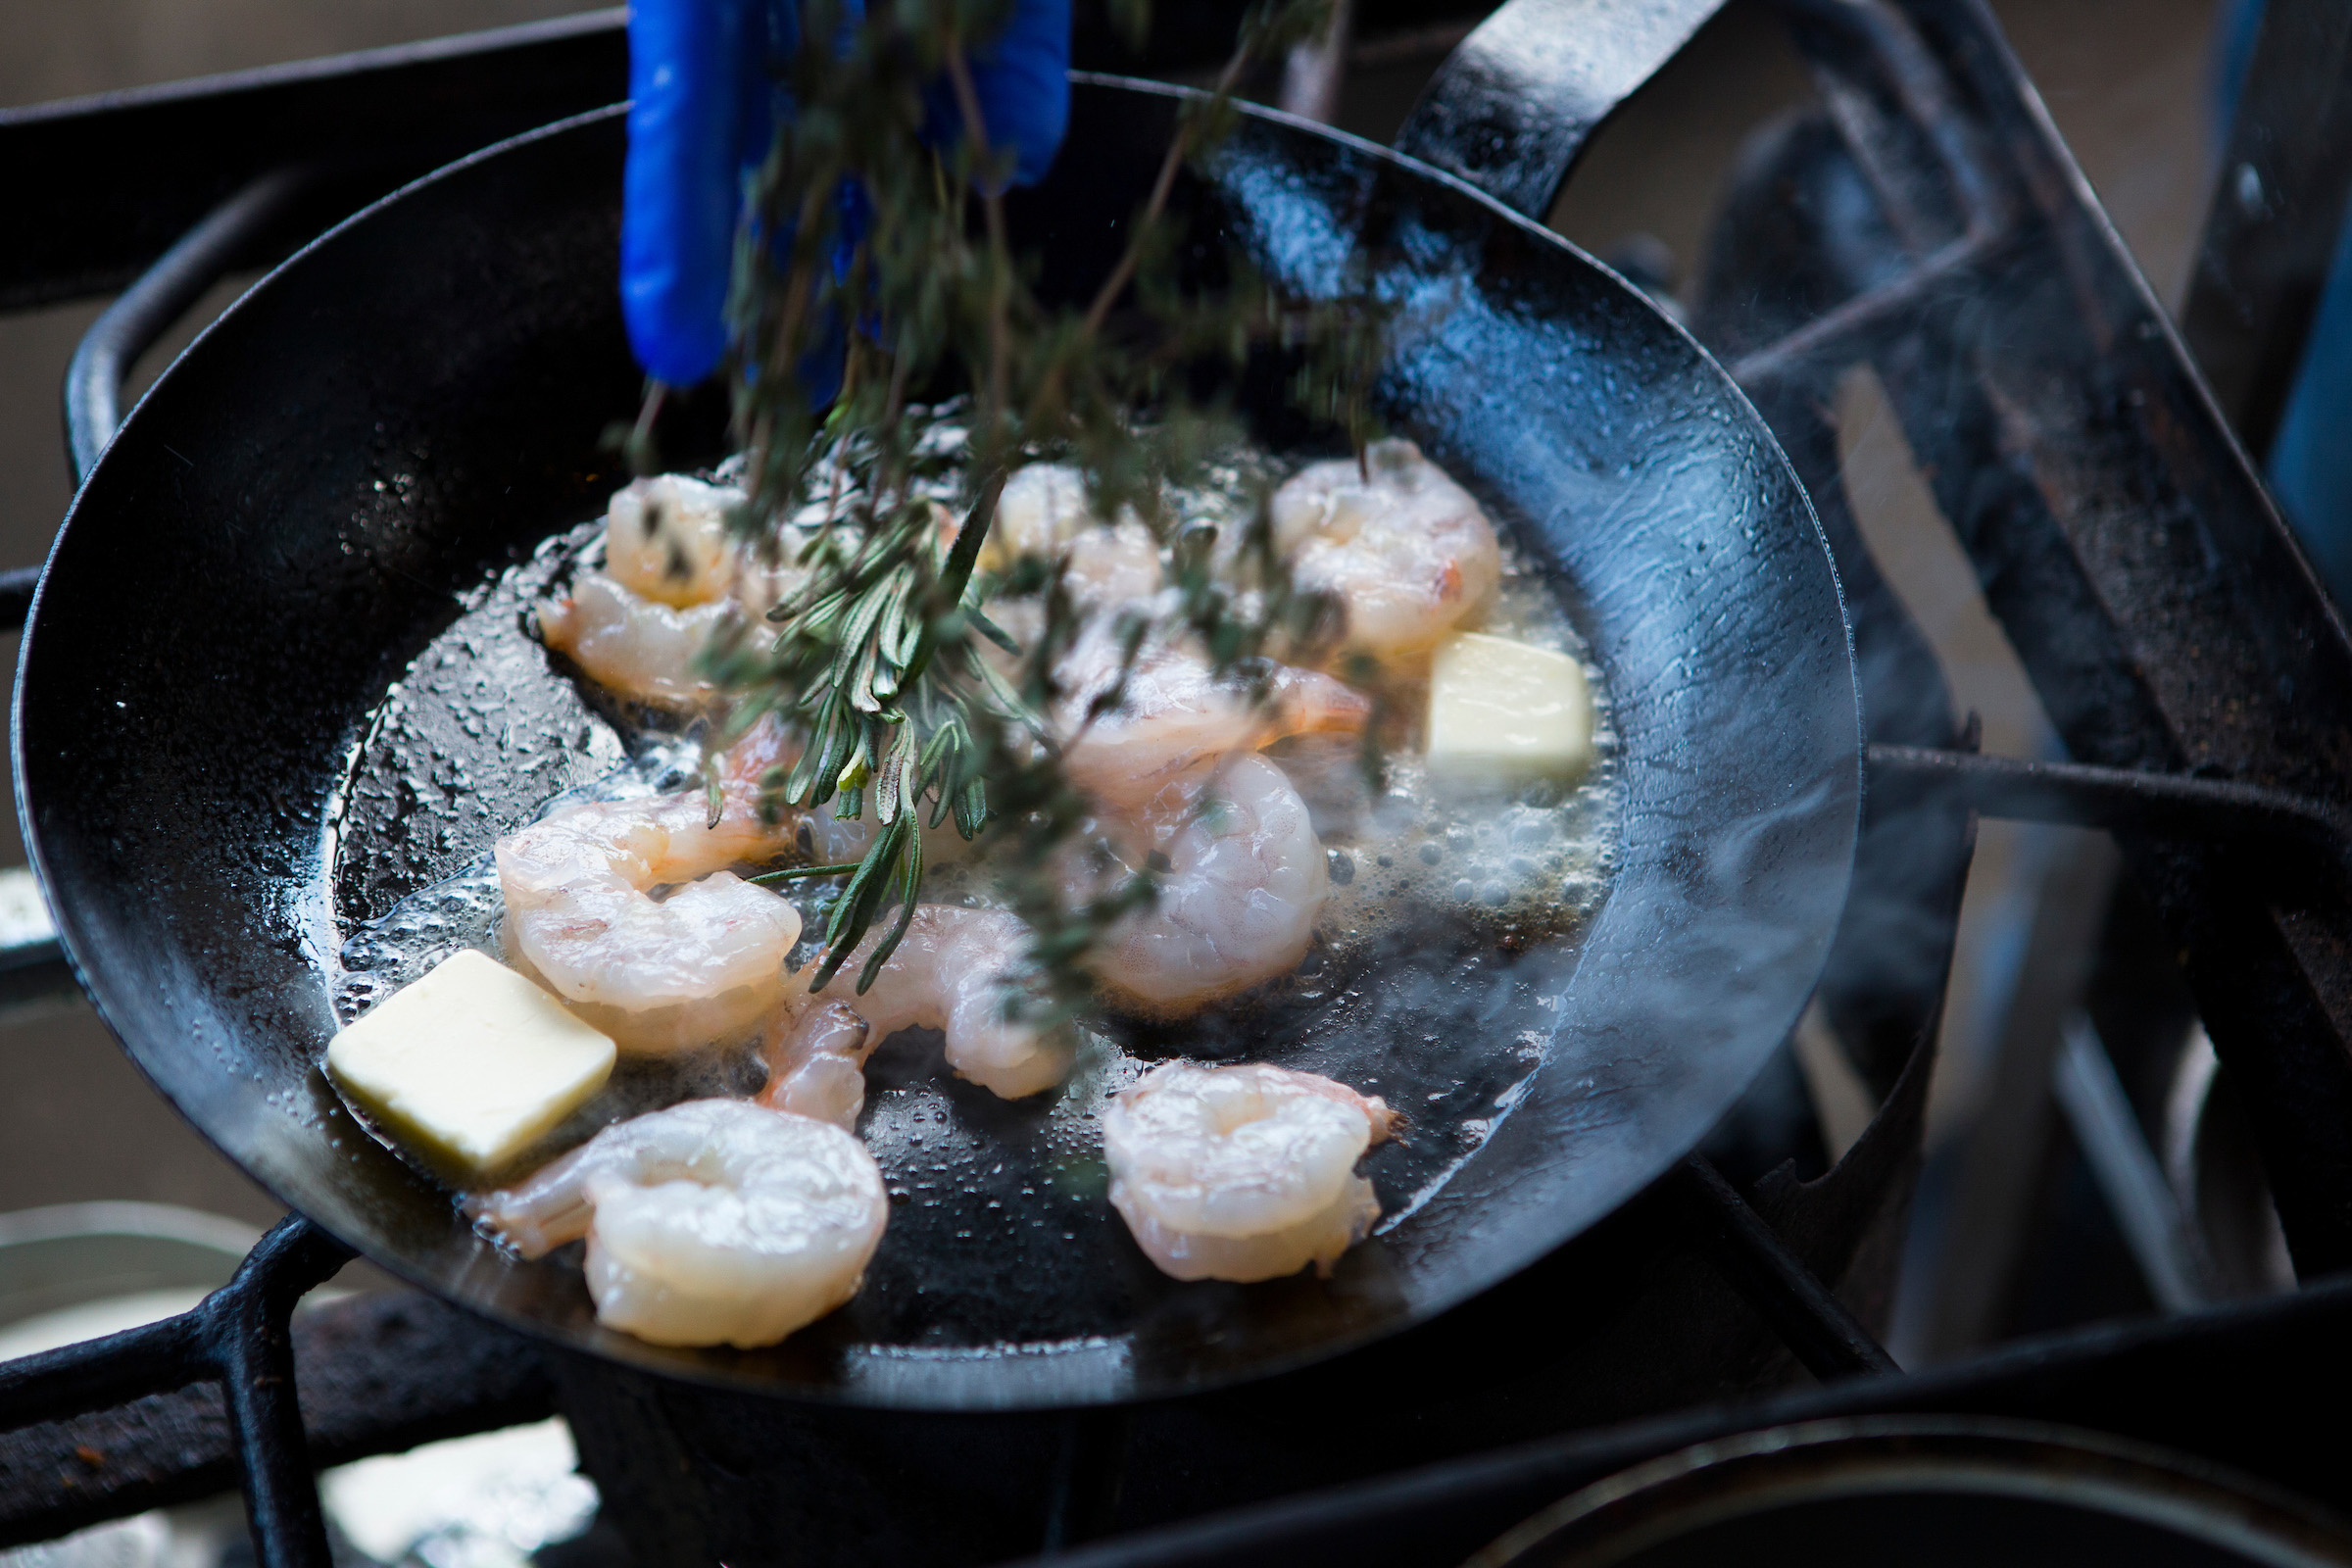 A closeup image of a chef dropping fresh herbs into a hot pan filled with button and raw shrimp